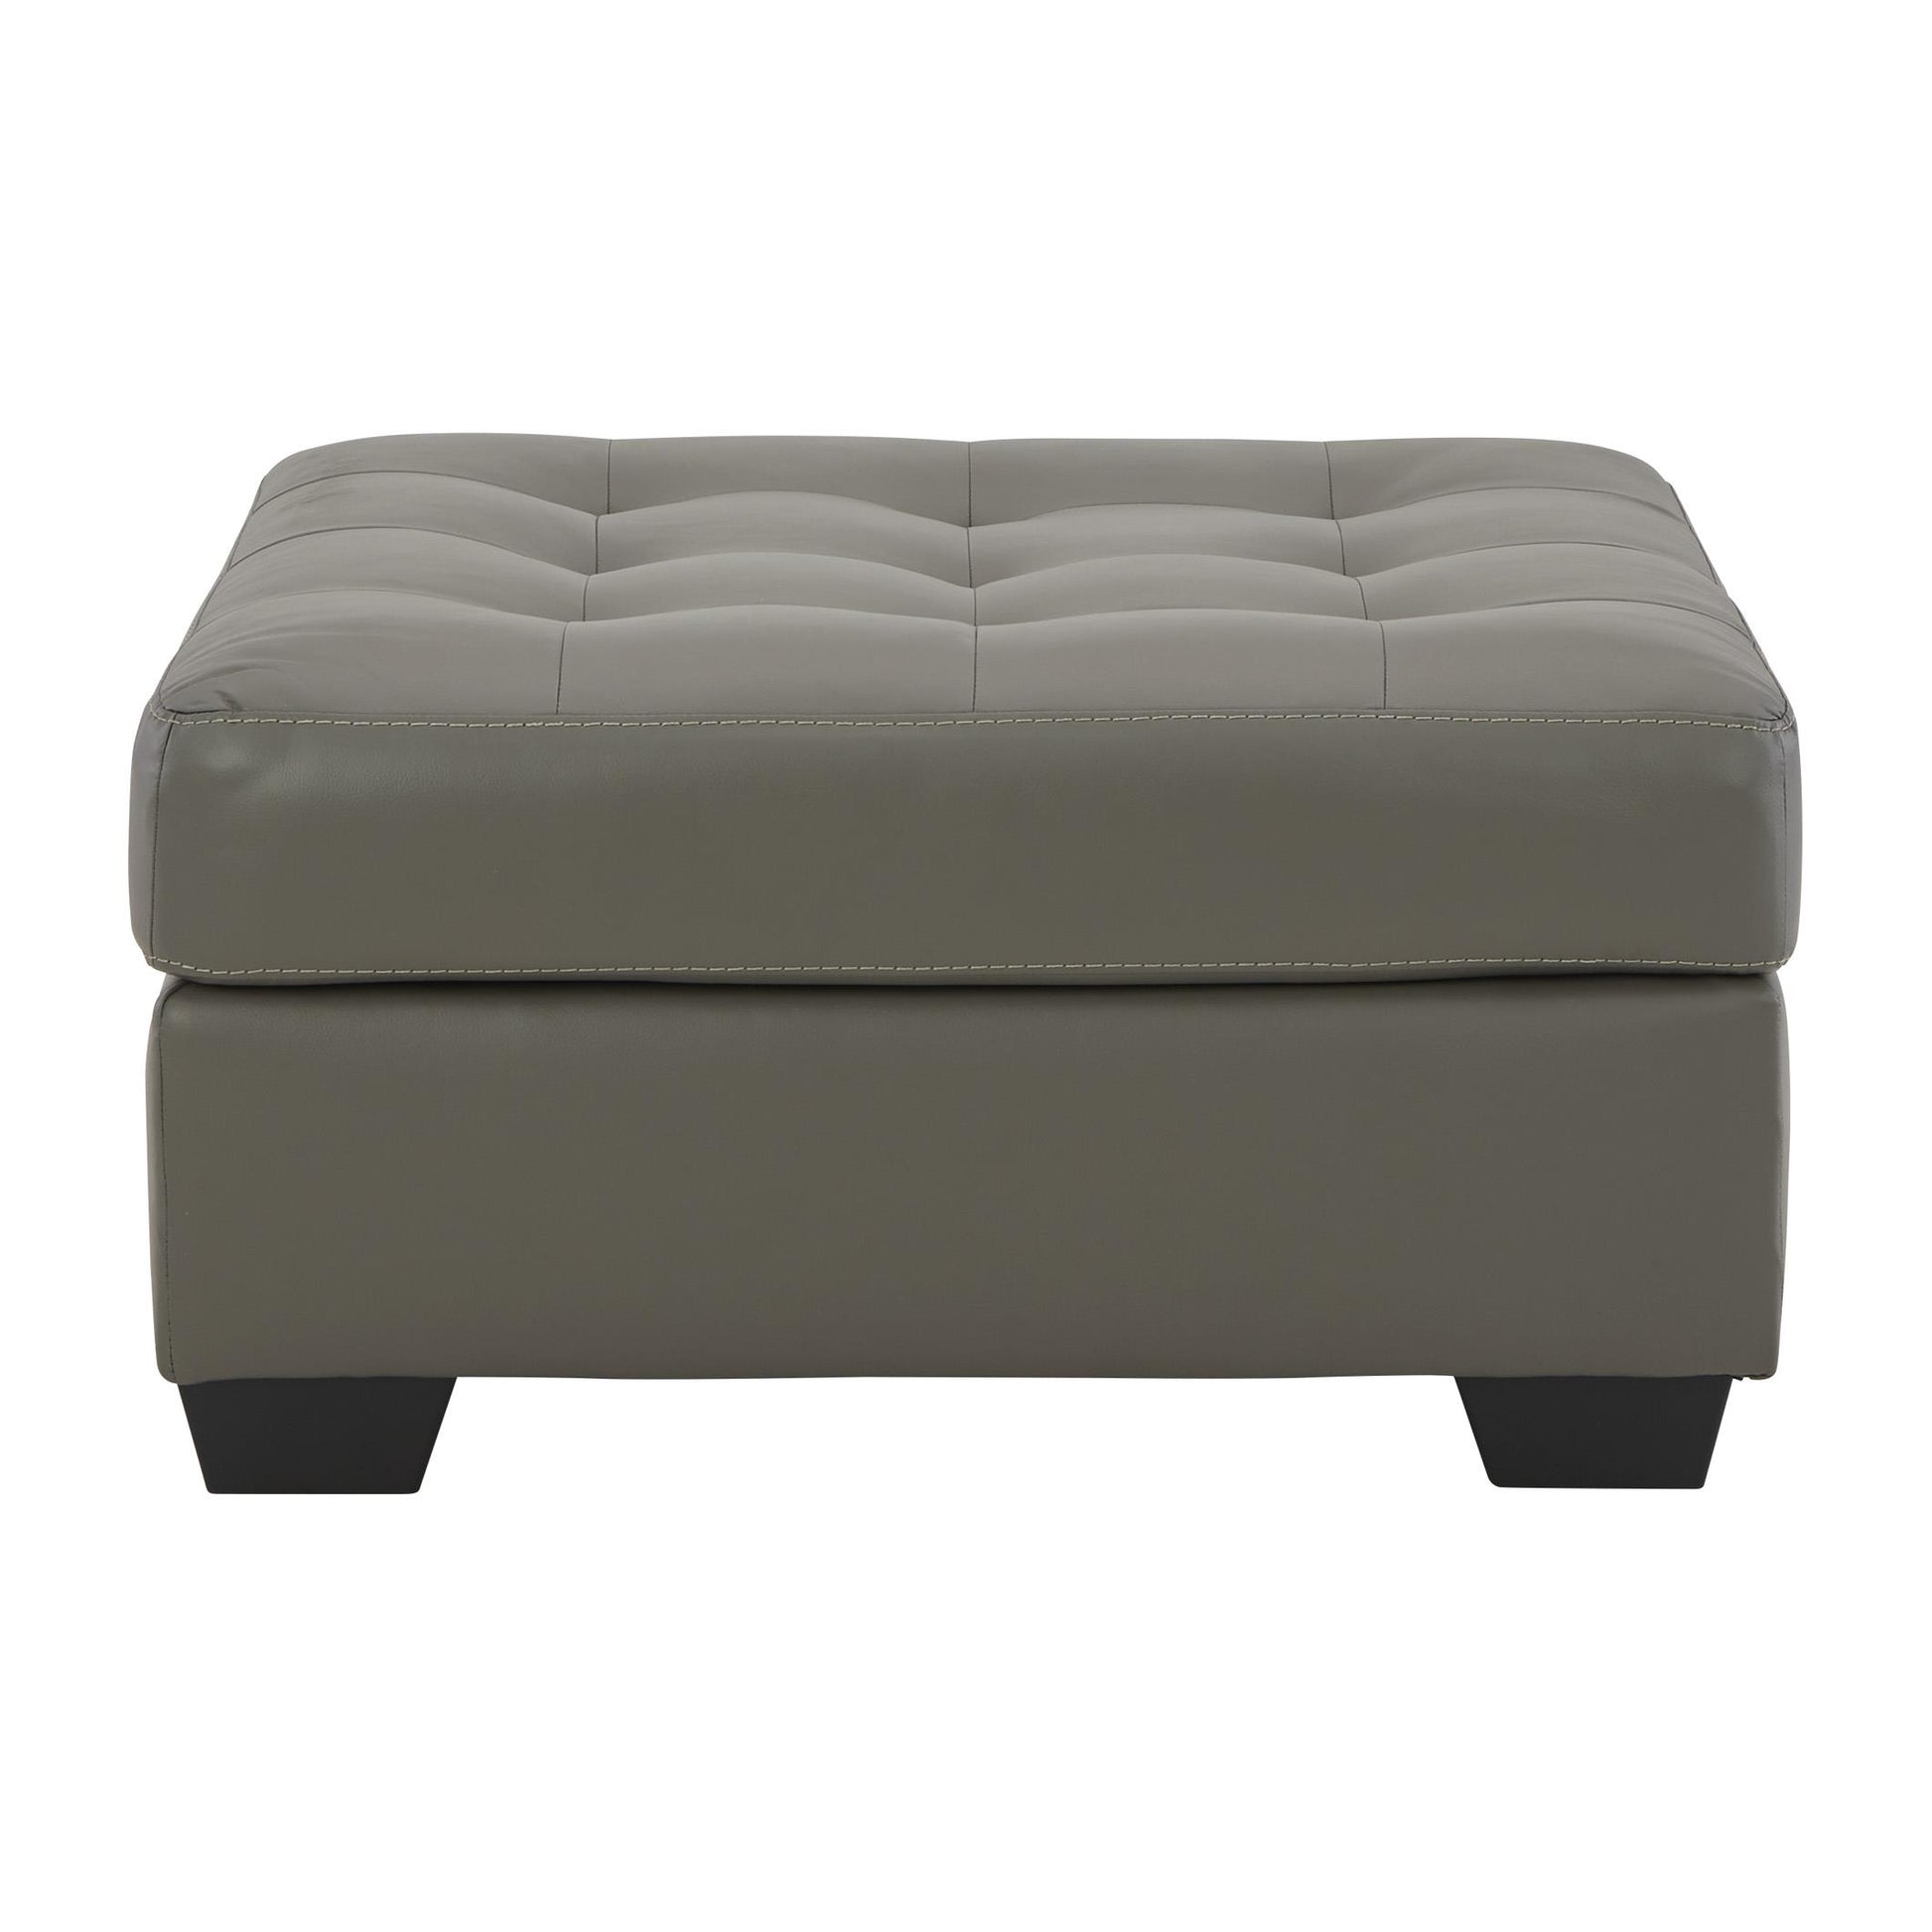 Signature Design by Ashley Donlen Leather Look Ottoman 5970208 IMAGE 2